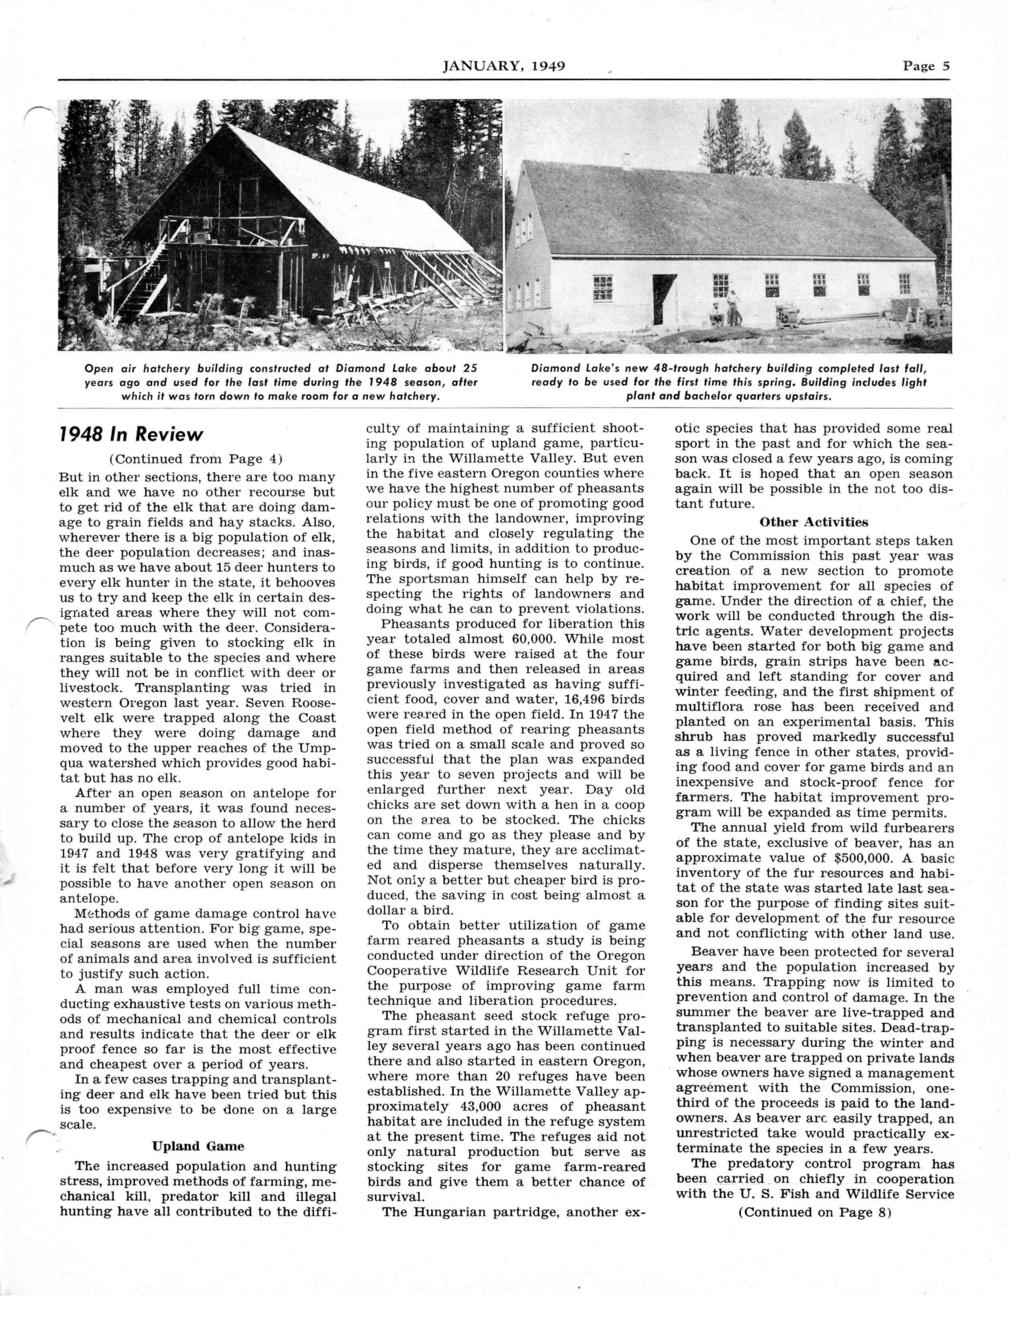 JANUARY, 1949 Page 5 Open air hatchery building constructed at Diamond Lake about 25 years ago and used for the last time during the 1948 season, after which it was torn down to make room for a new